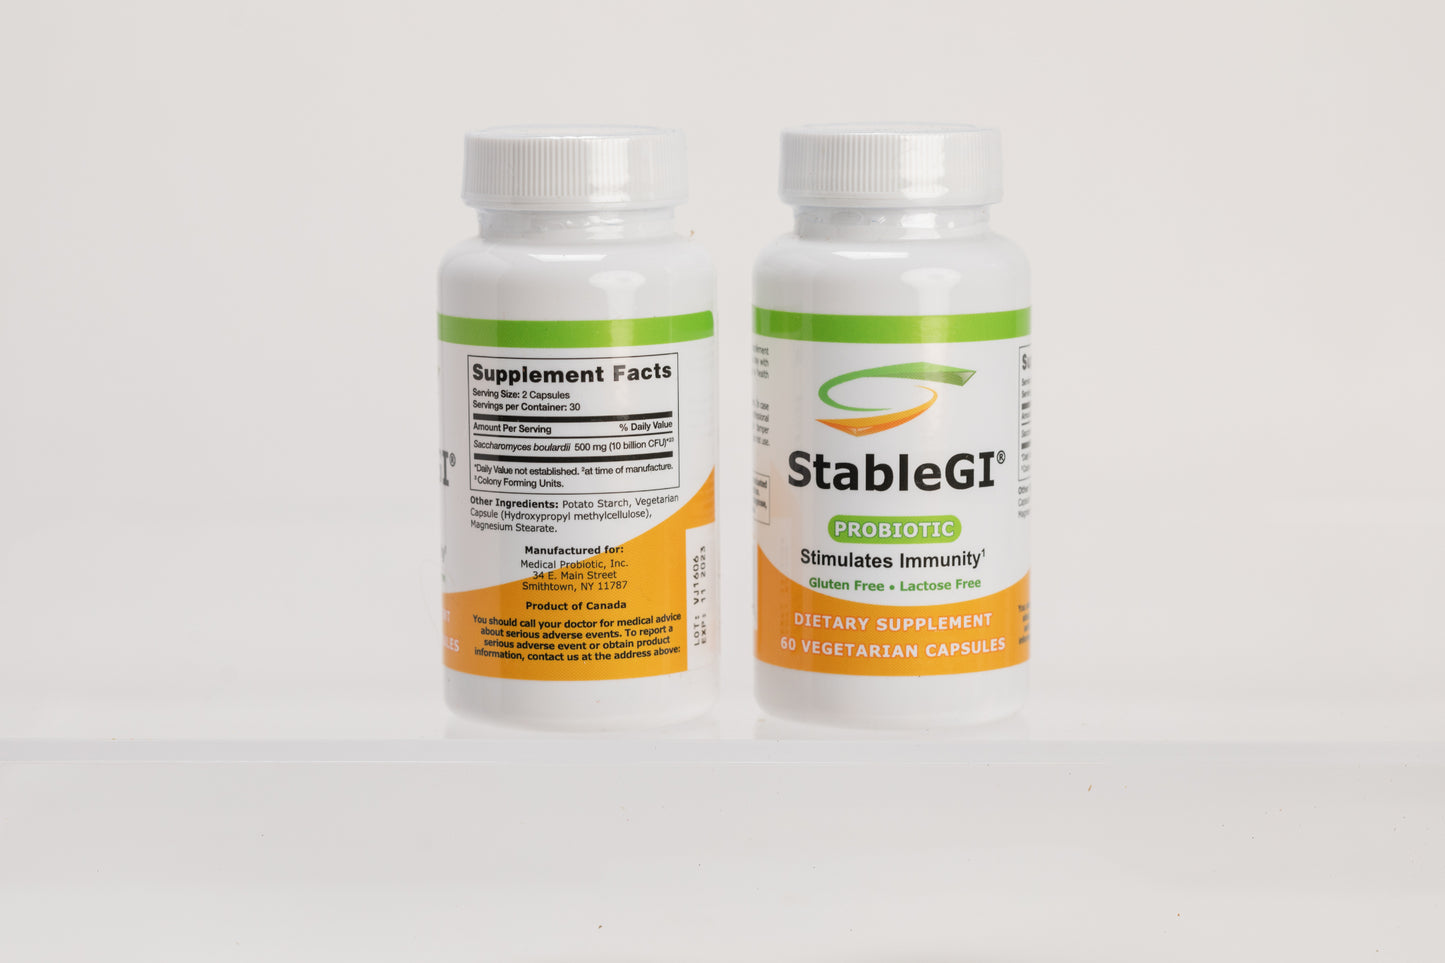 A picture of 2 bottles of StableGI probiotic showing the front  label on one bottle and the supplement facts panel